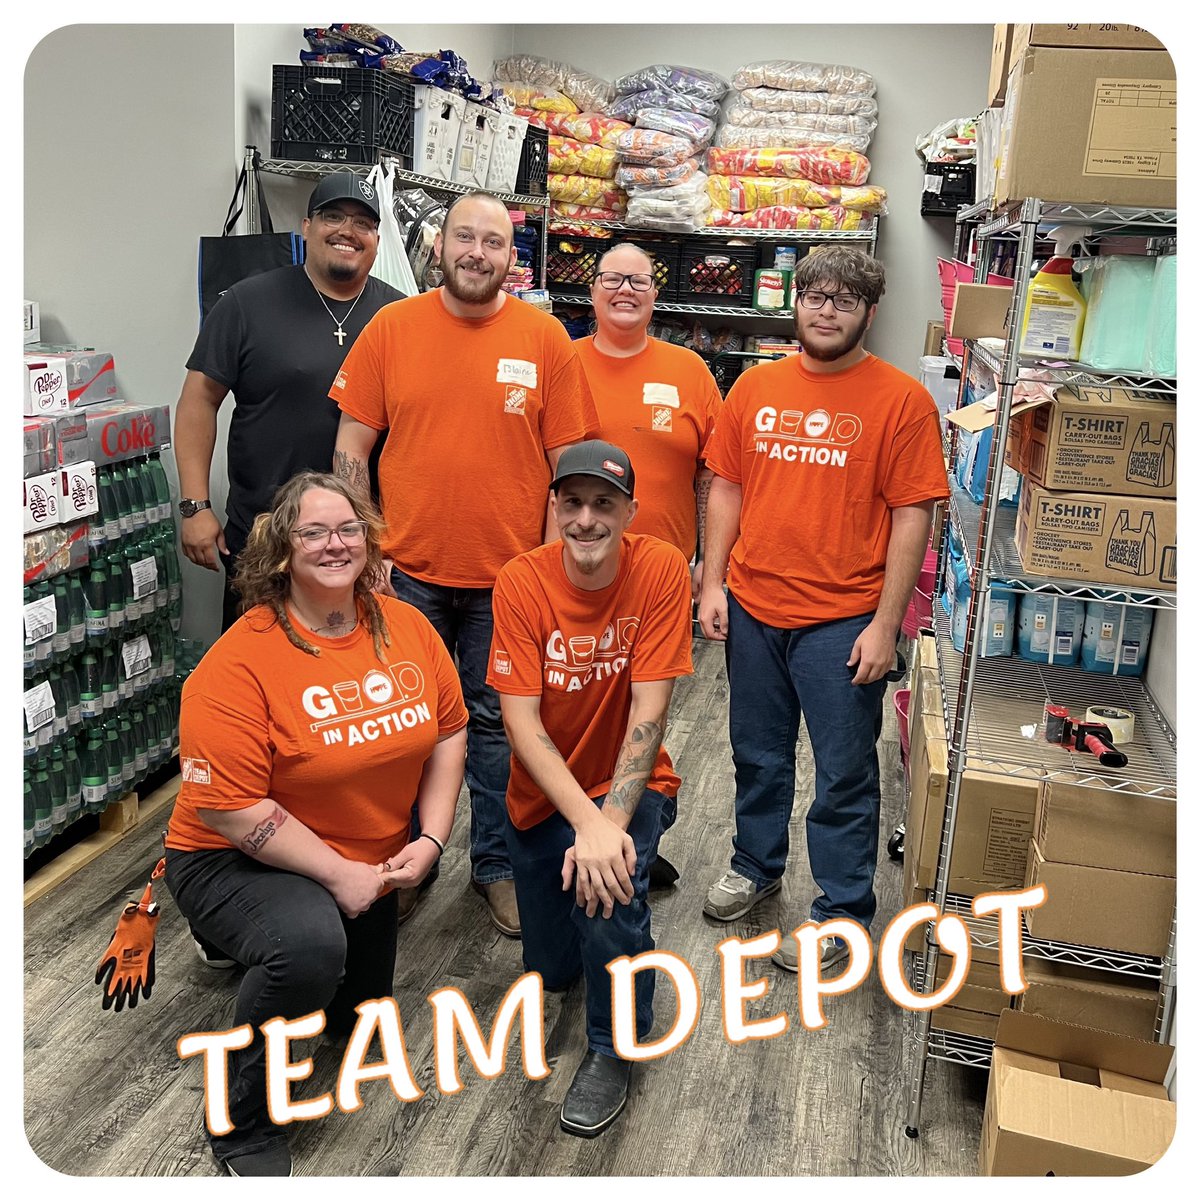 A successful Team Depot in the books. Thank you to everyone who showed up to volunteer their free time to assist the Irving Food Pantry with sorting, and handing out care packages to those in need! #TEAMDEPOT #540.